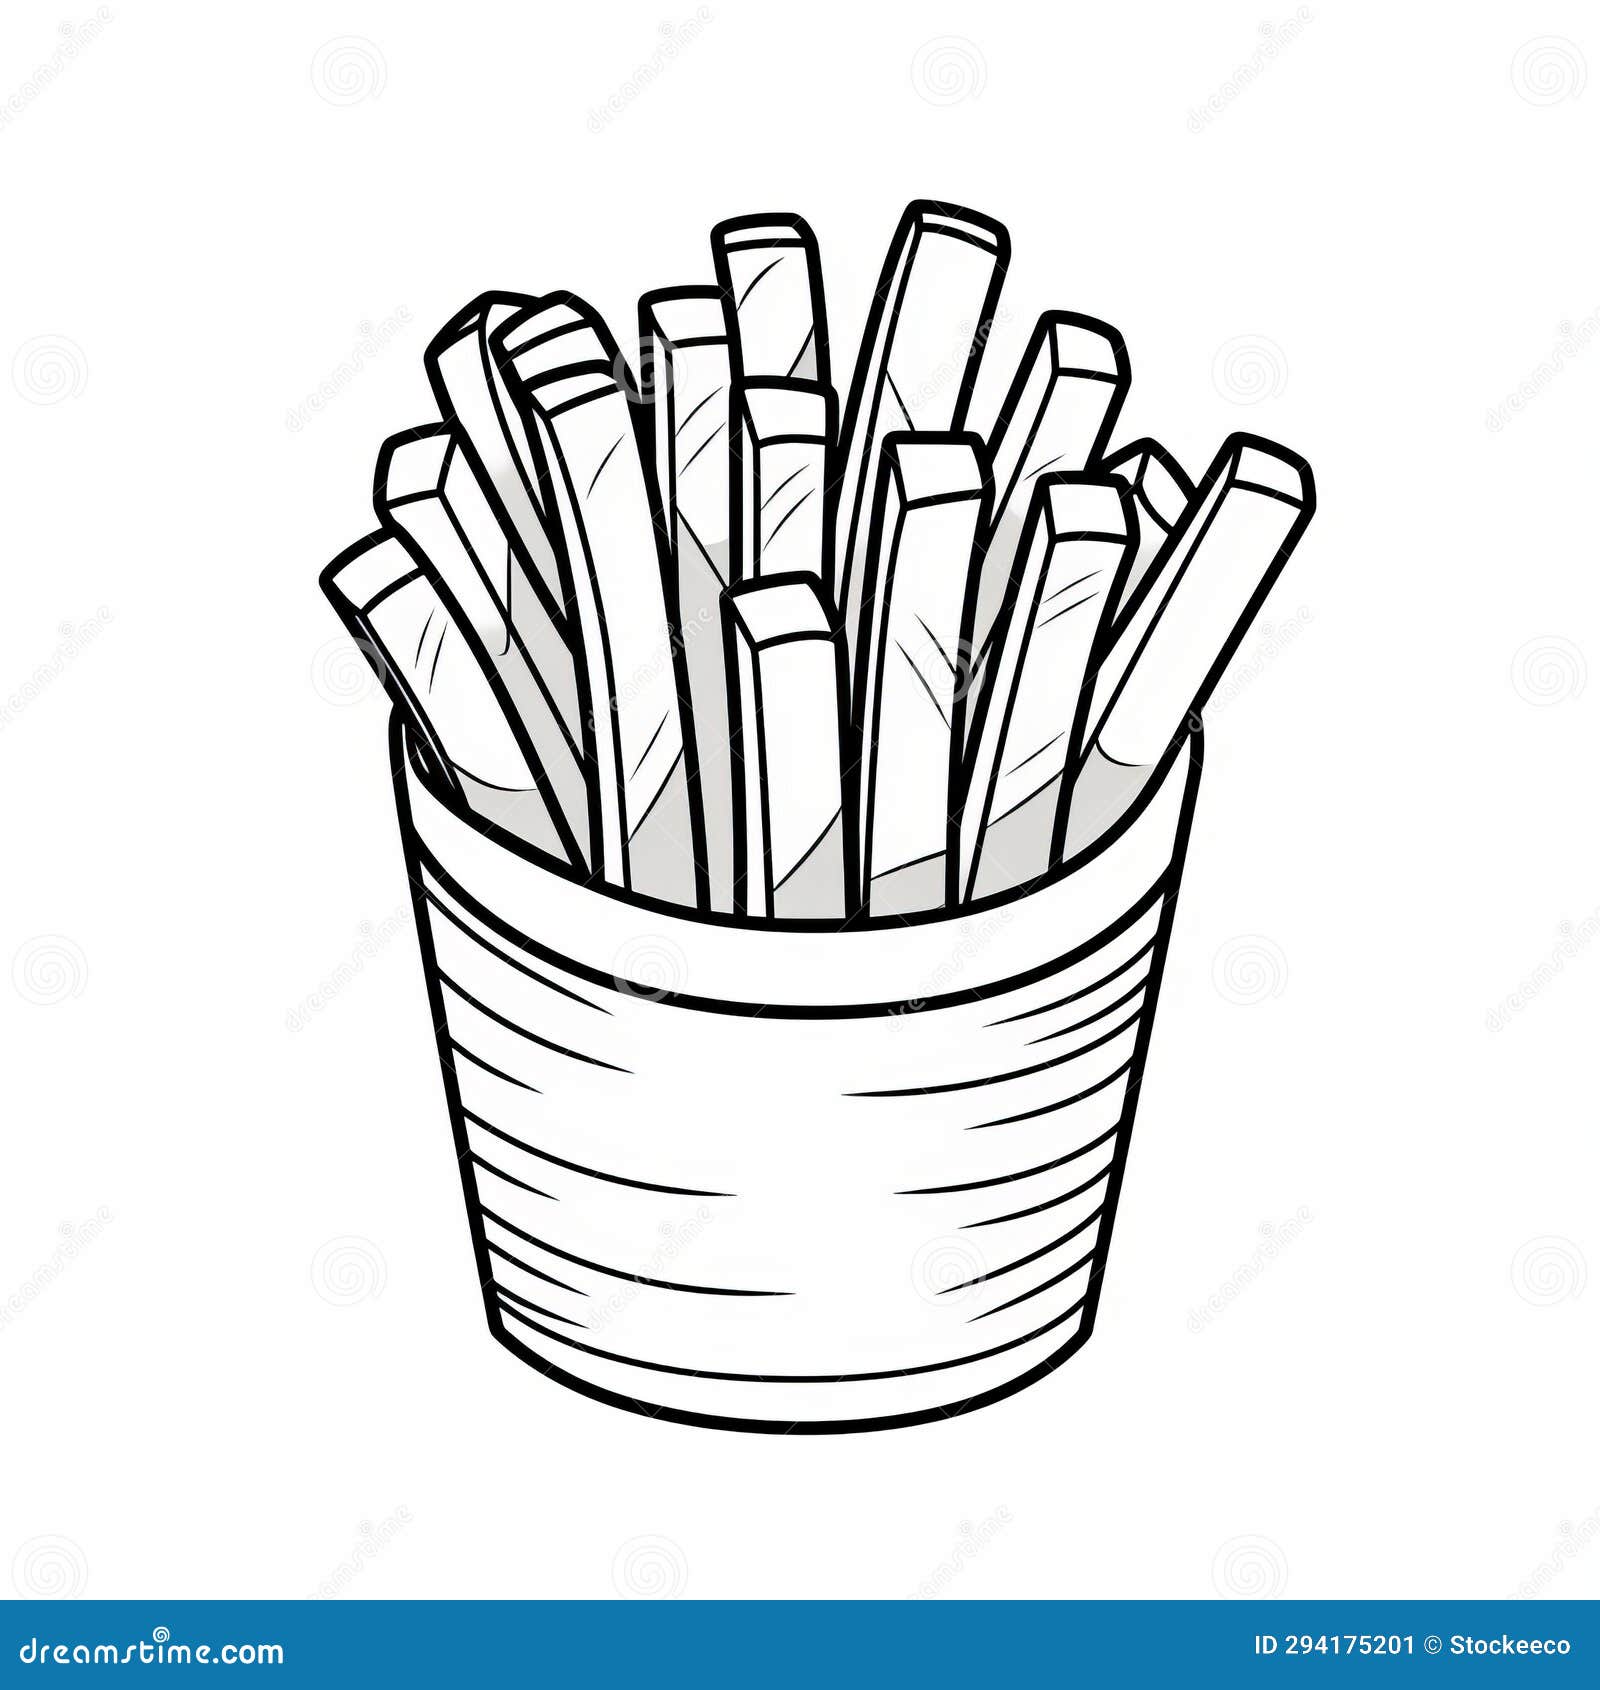 Simple Fries Coloring Page for Kids Stock Illustration - Illustration ...